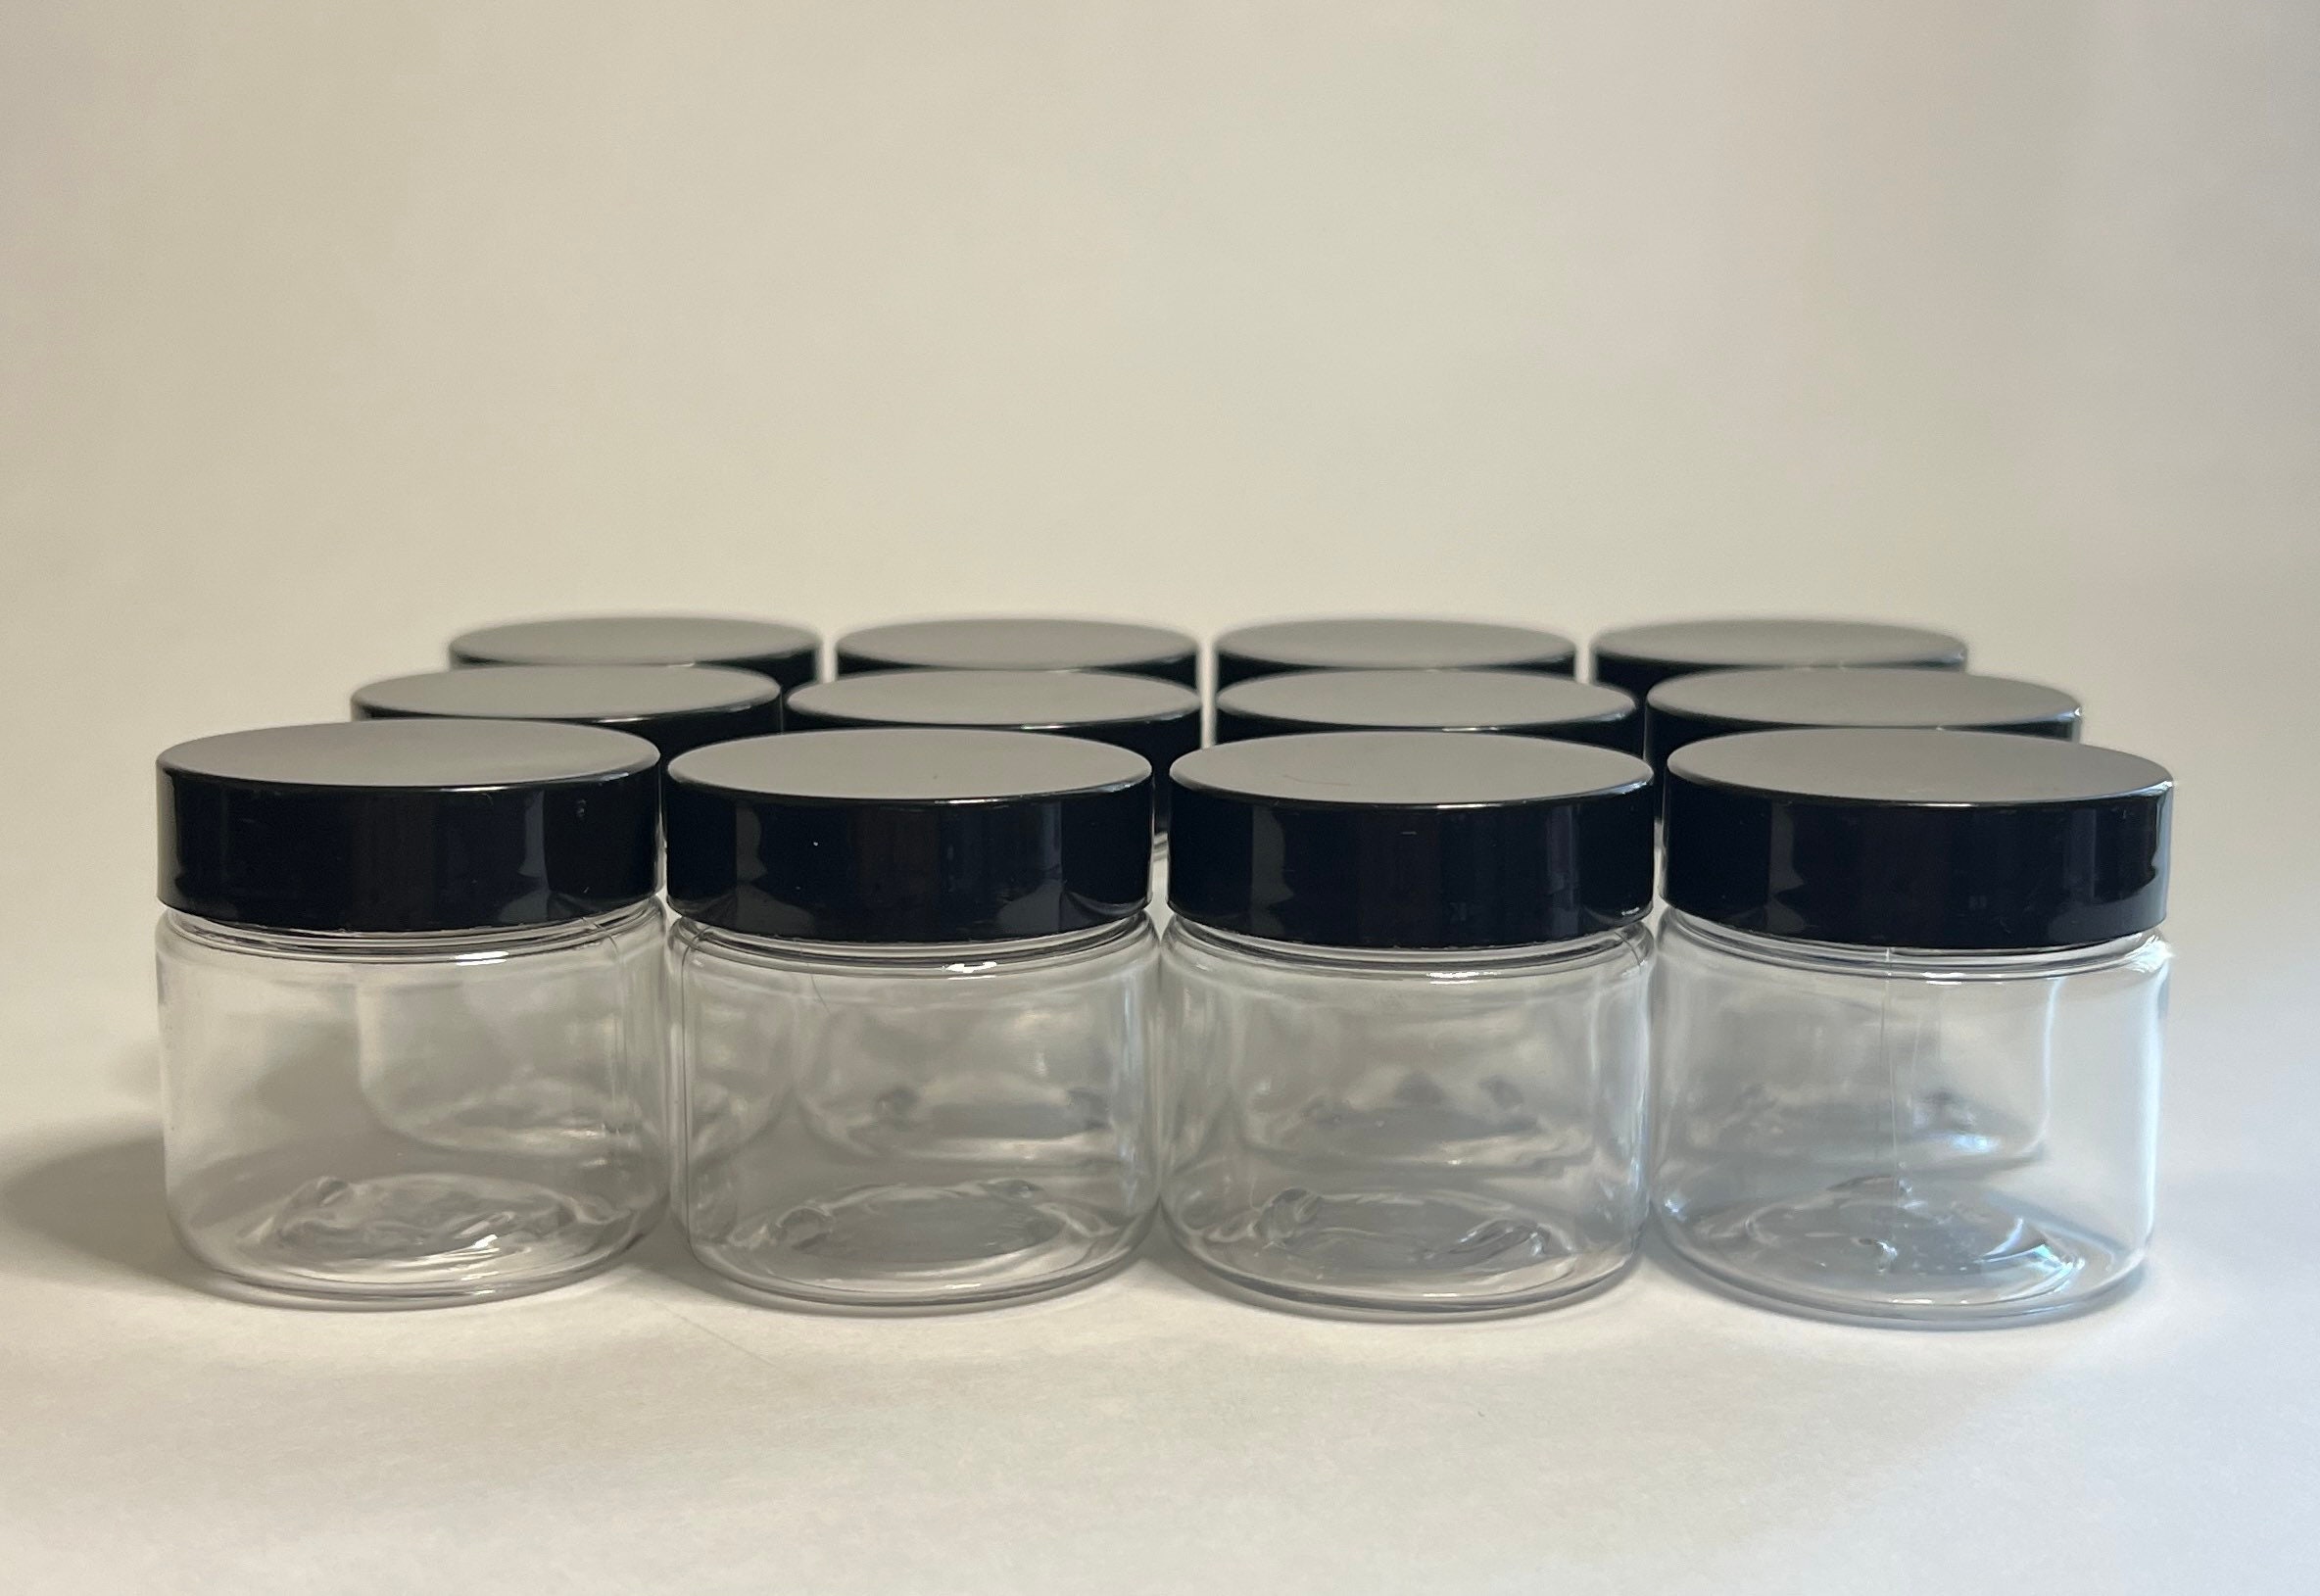 1 oz / 30 ml Clear Thick Wall Acrylic Travel Refillable Pot Container Jar  Samples, Balms, Makeup and Cosmetics, Salves, Airtight and BPA Free (3 pack)